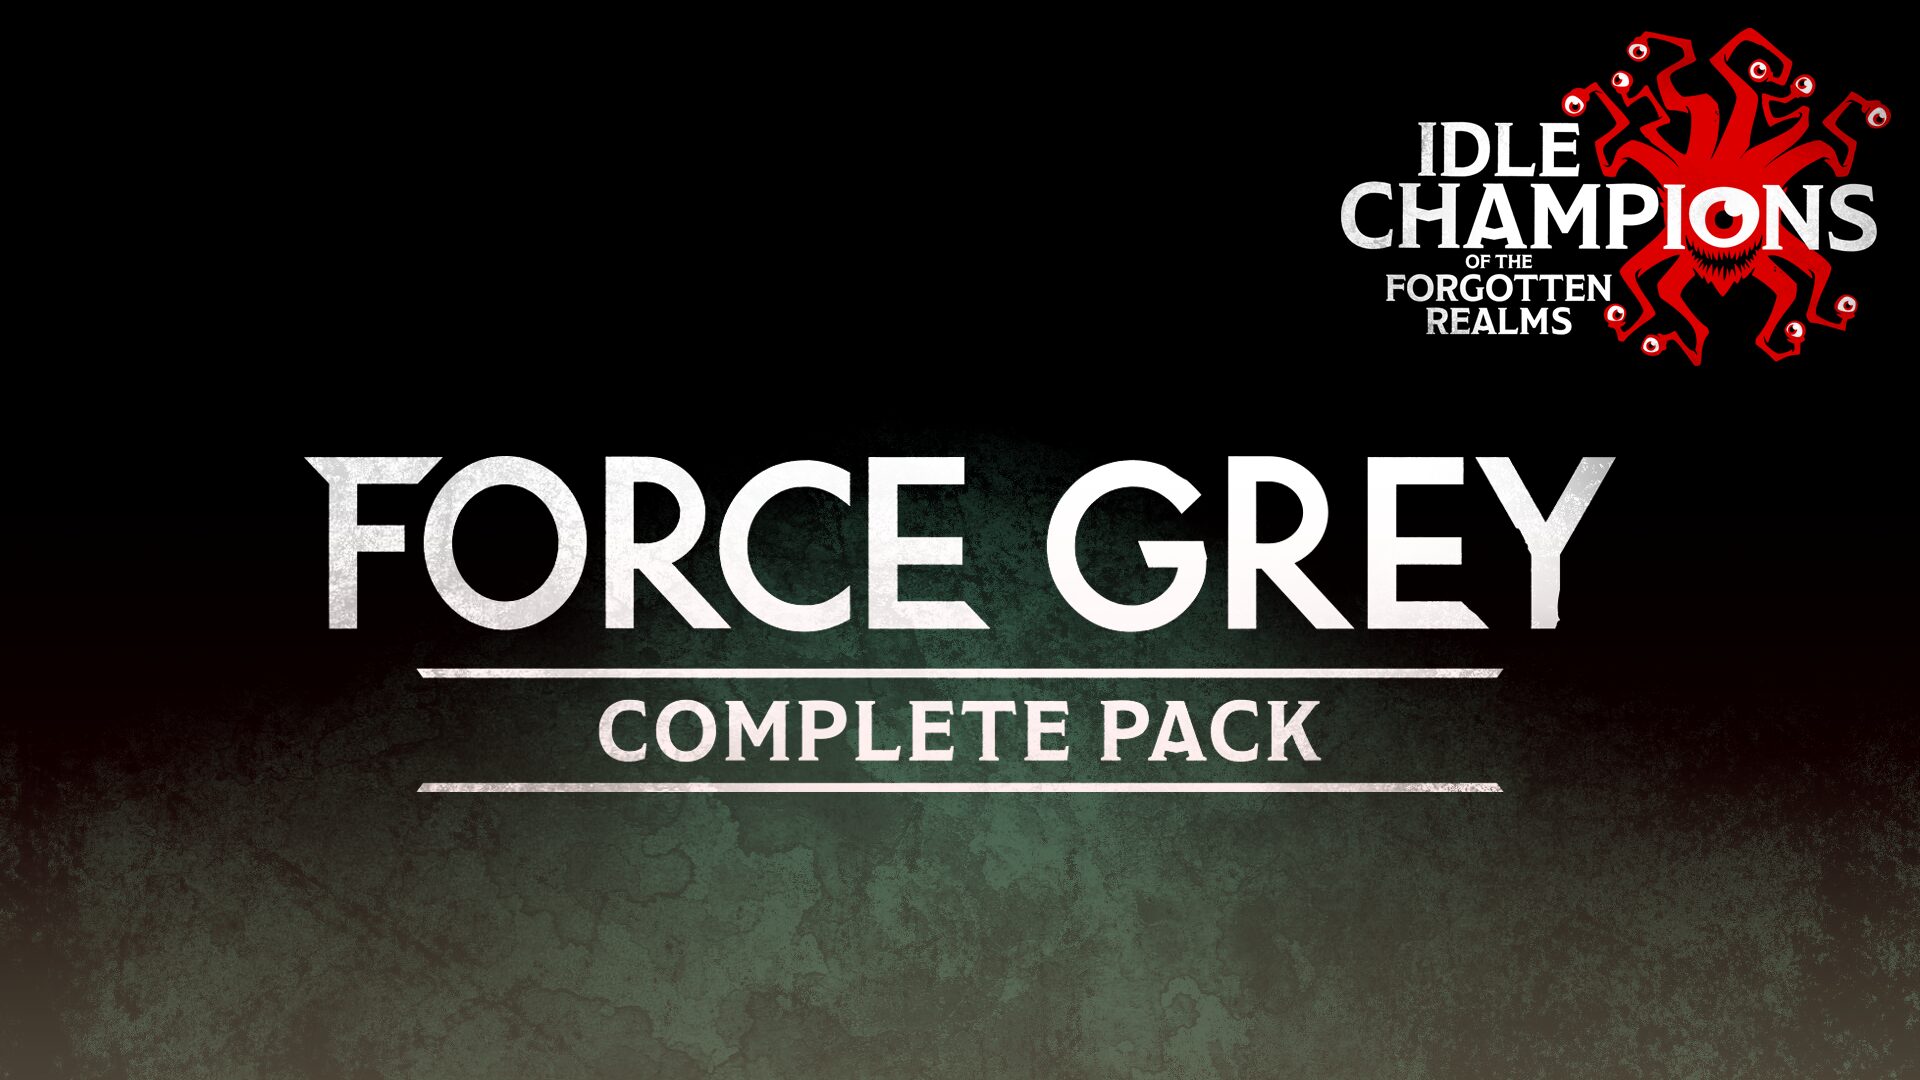 Idle Champions: Complete Force Grey Pack